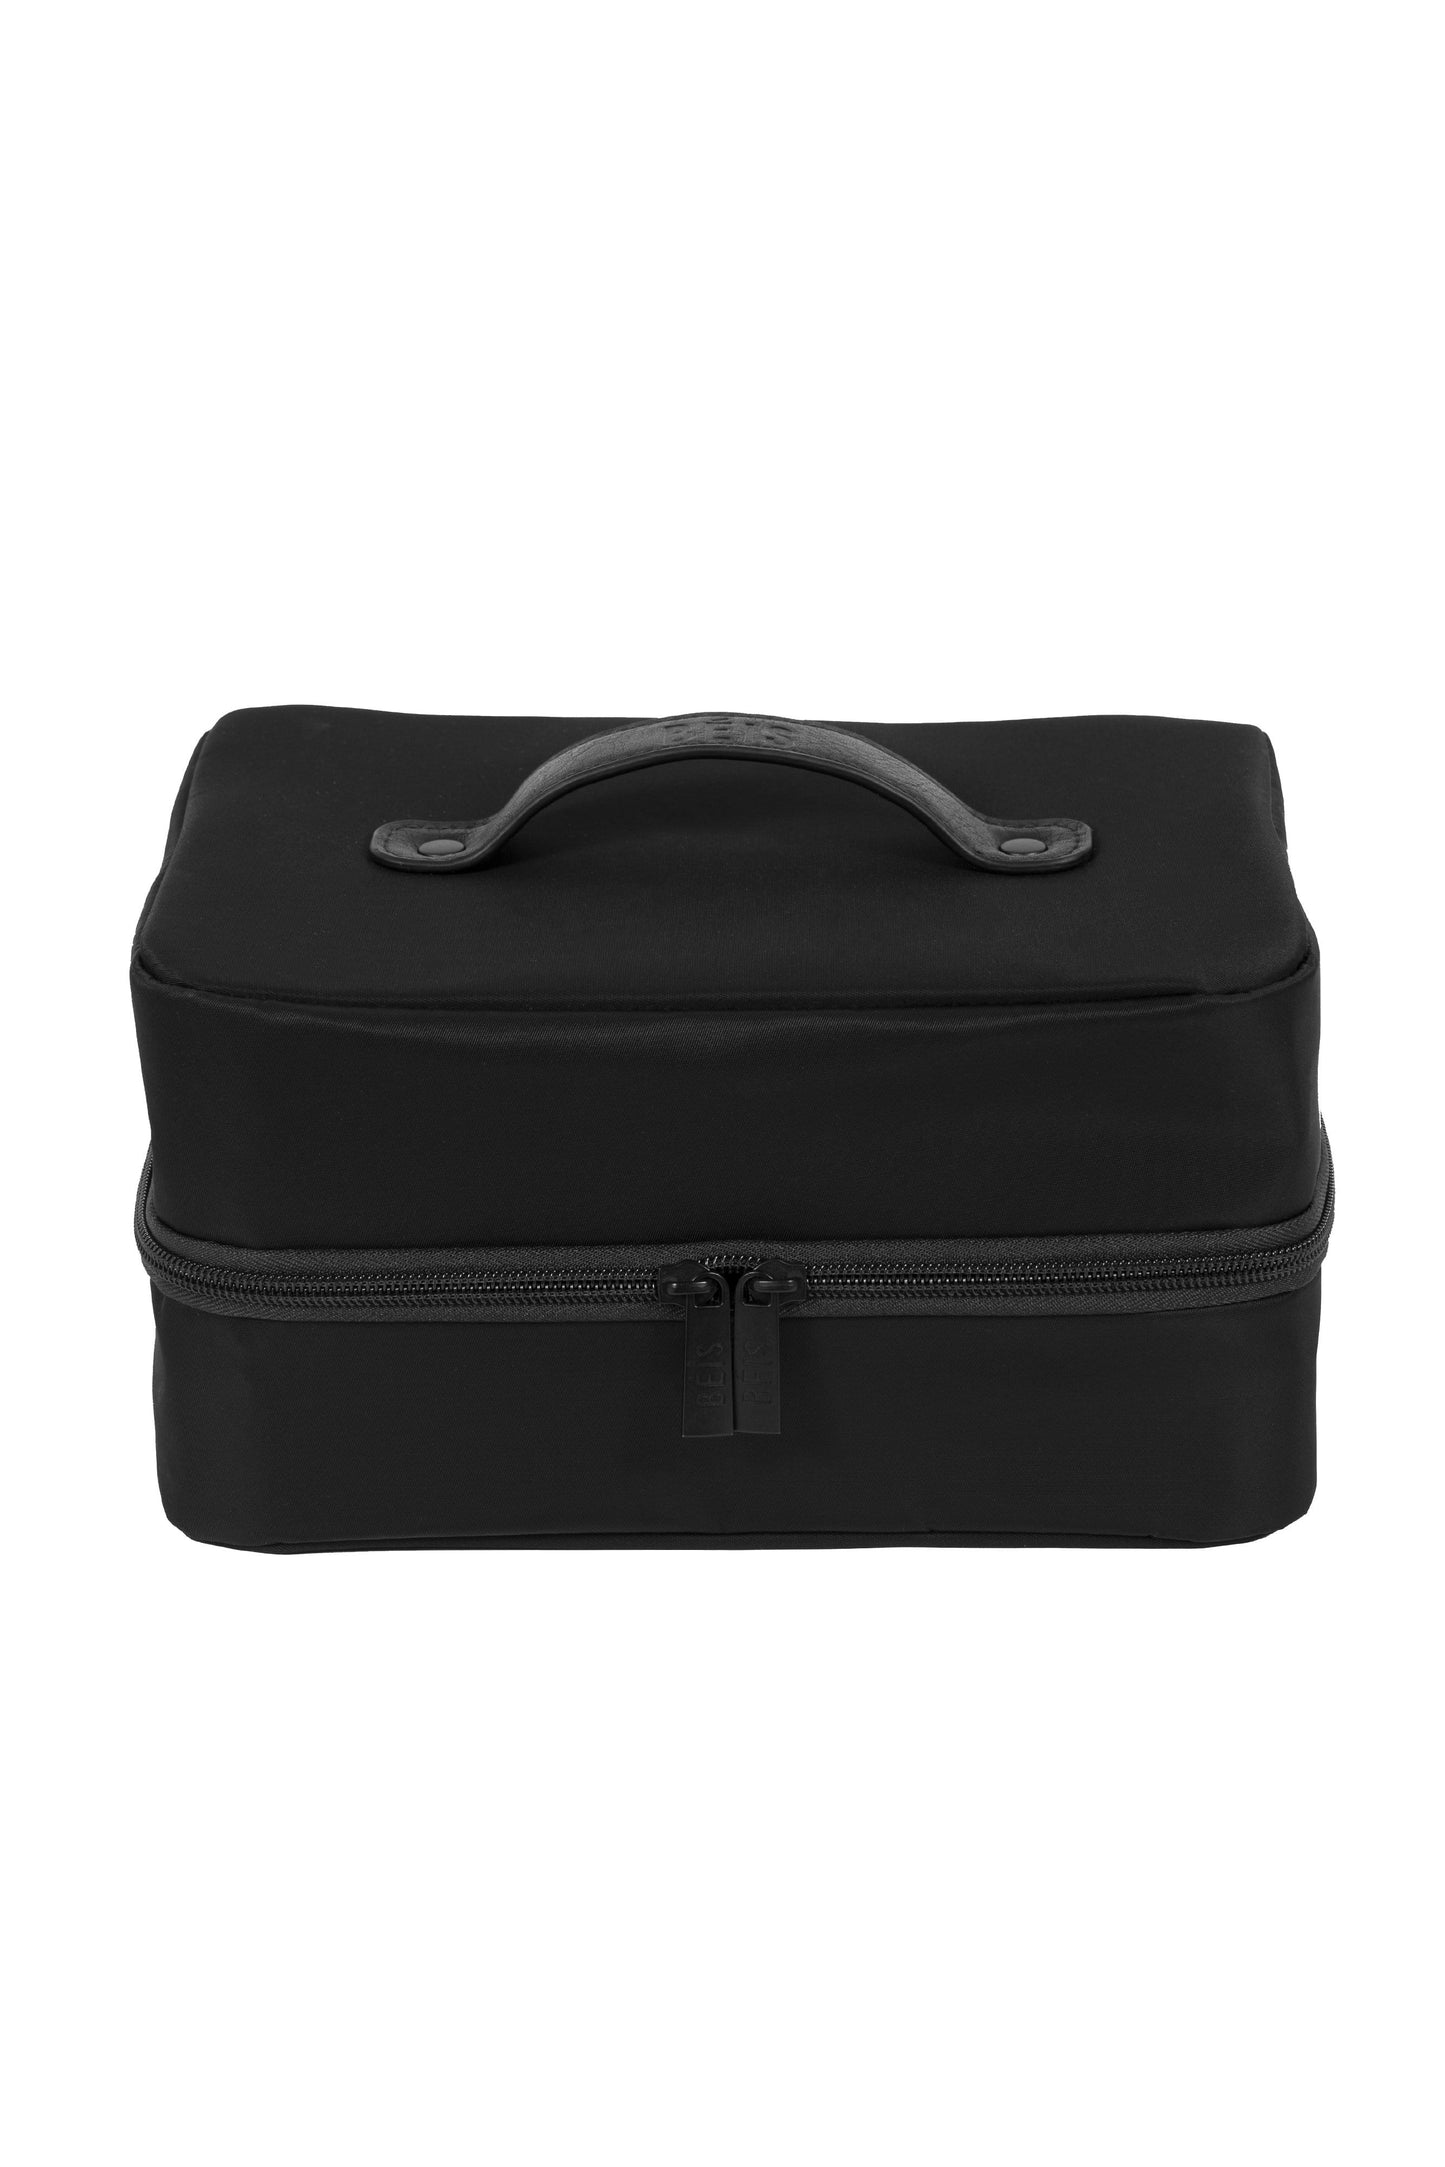 Front Angle, Hanging Cosmetic Case in Black